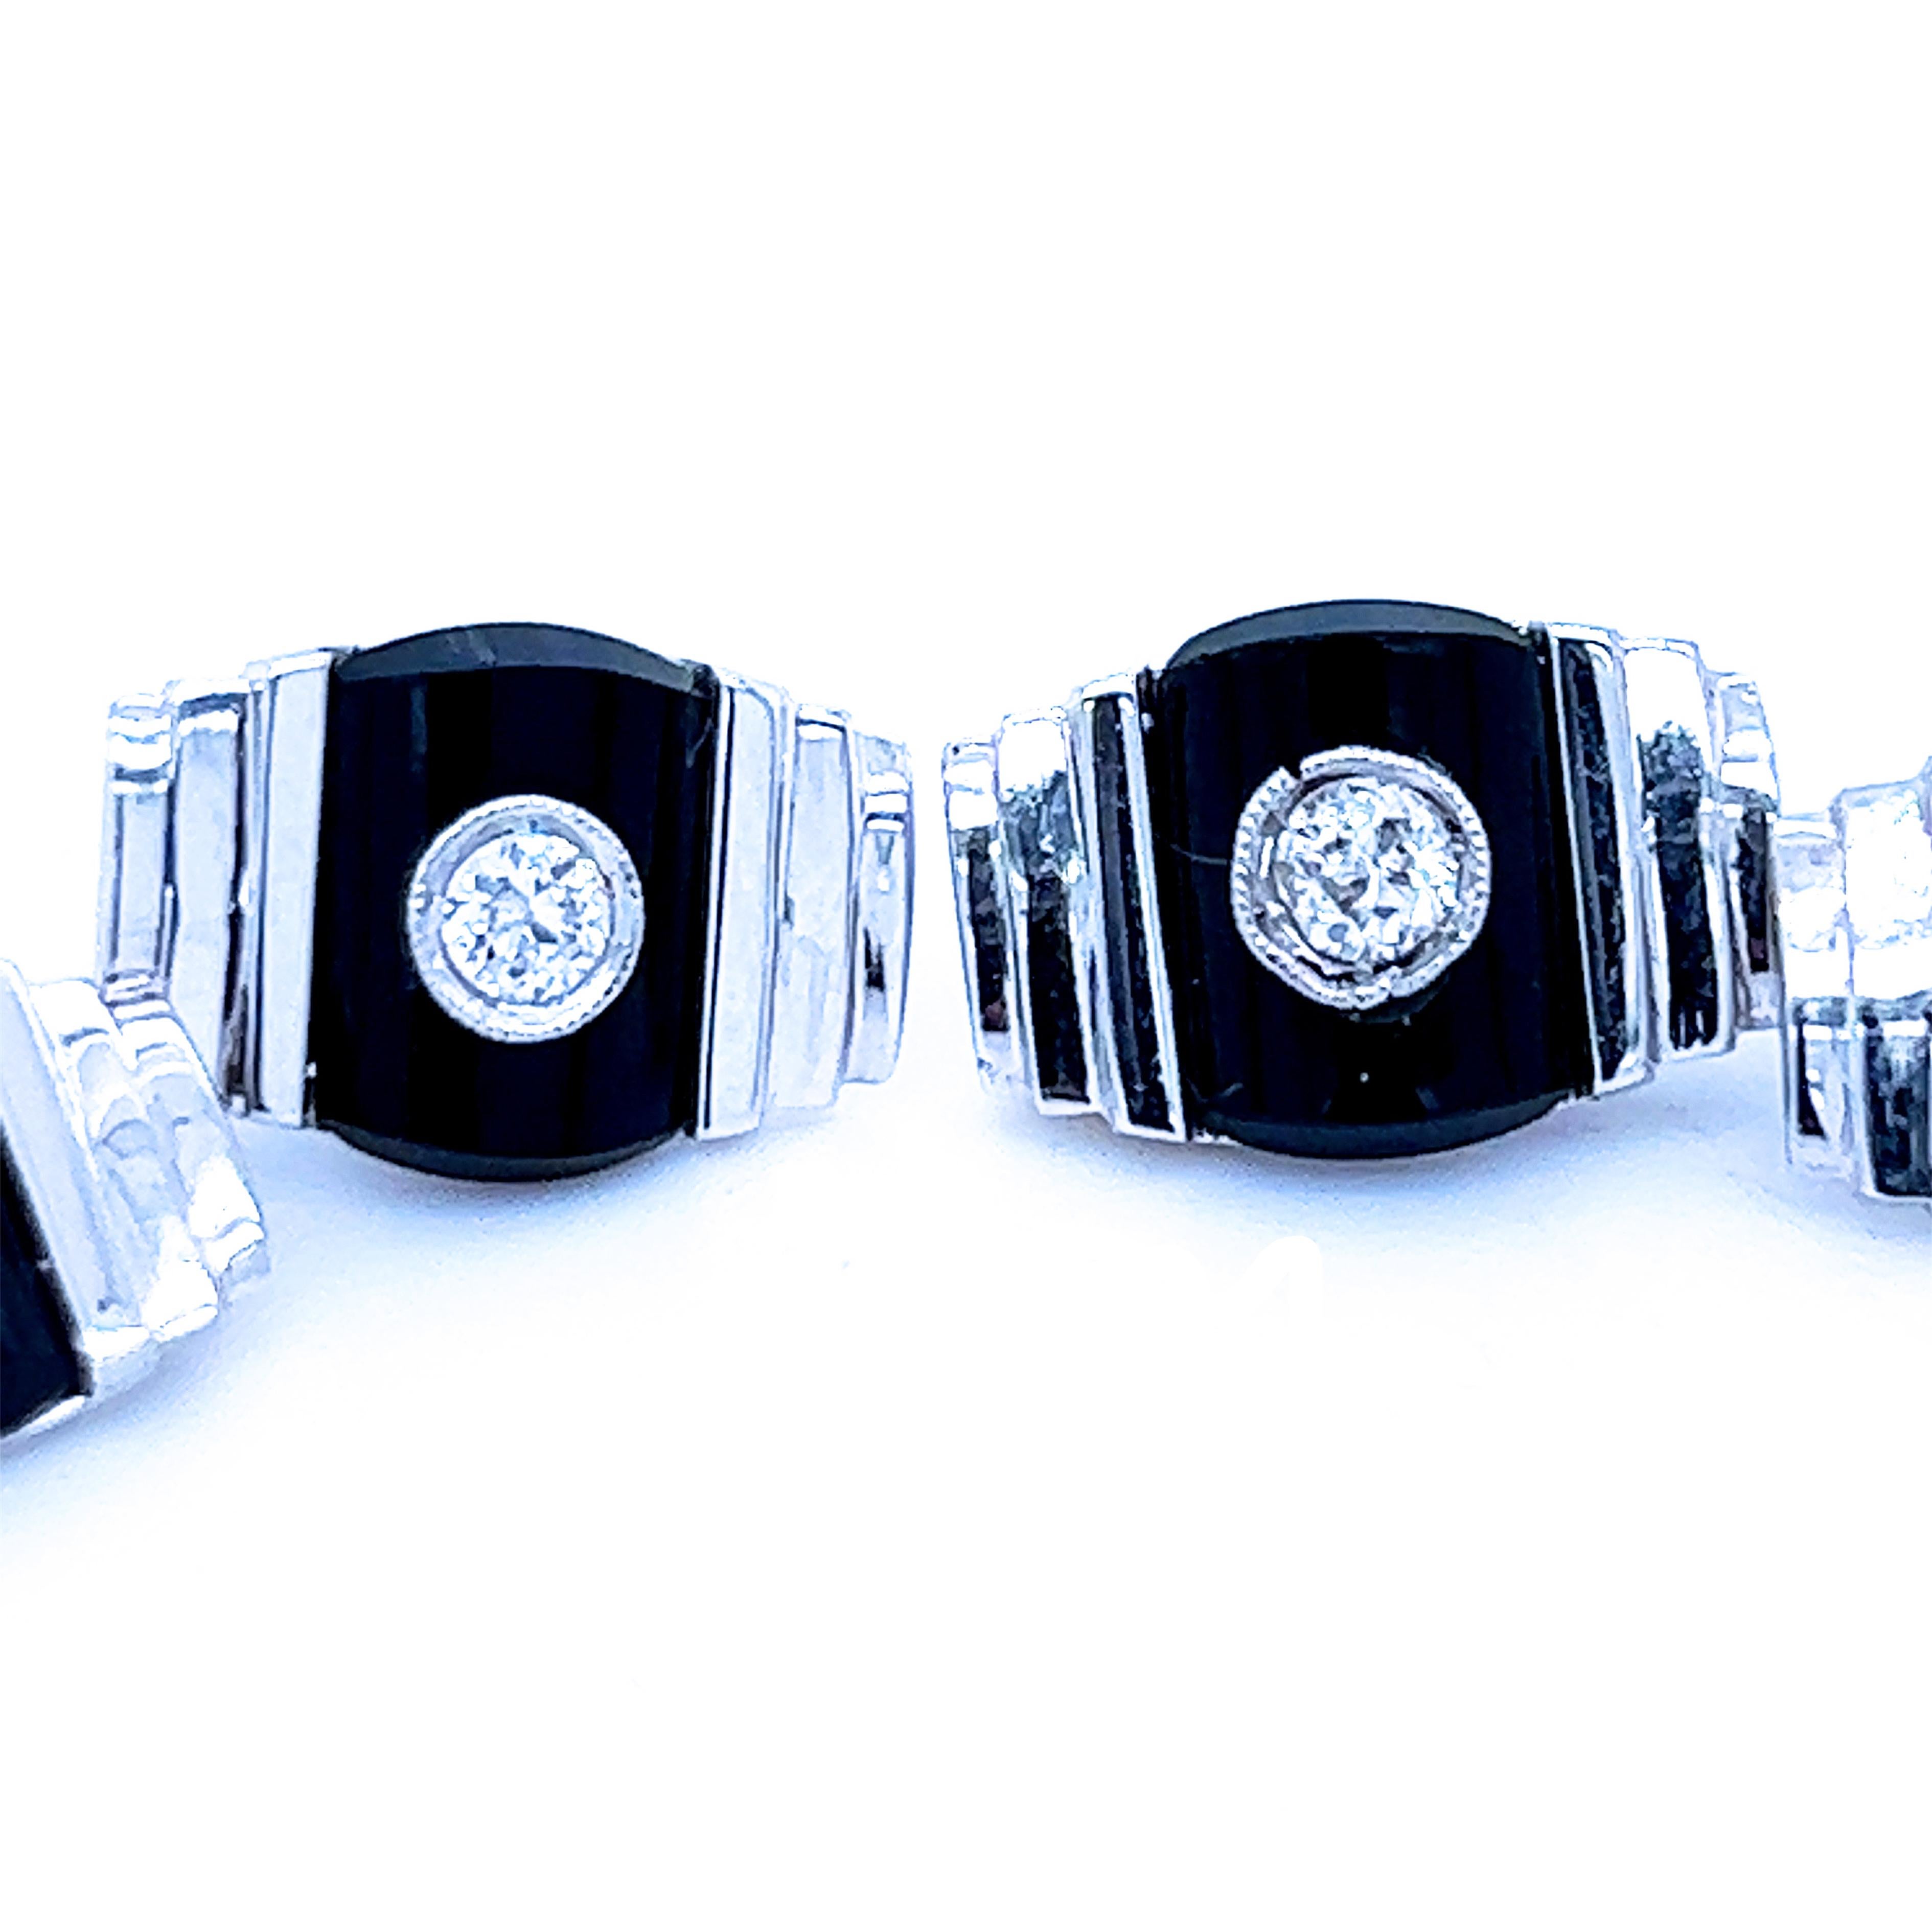 Original 1960 Smart, Chic yet Timeless 0.32 White Diamond Brilliant Cut Hand inlaid Onyx 18k White Gold Setting Cufflinks.
These cufflinks are as new,never used or worn, in our tobacco suede leather case and pouch.
